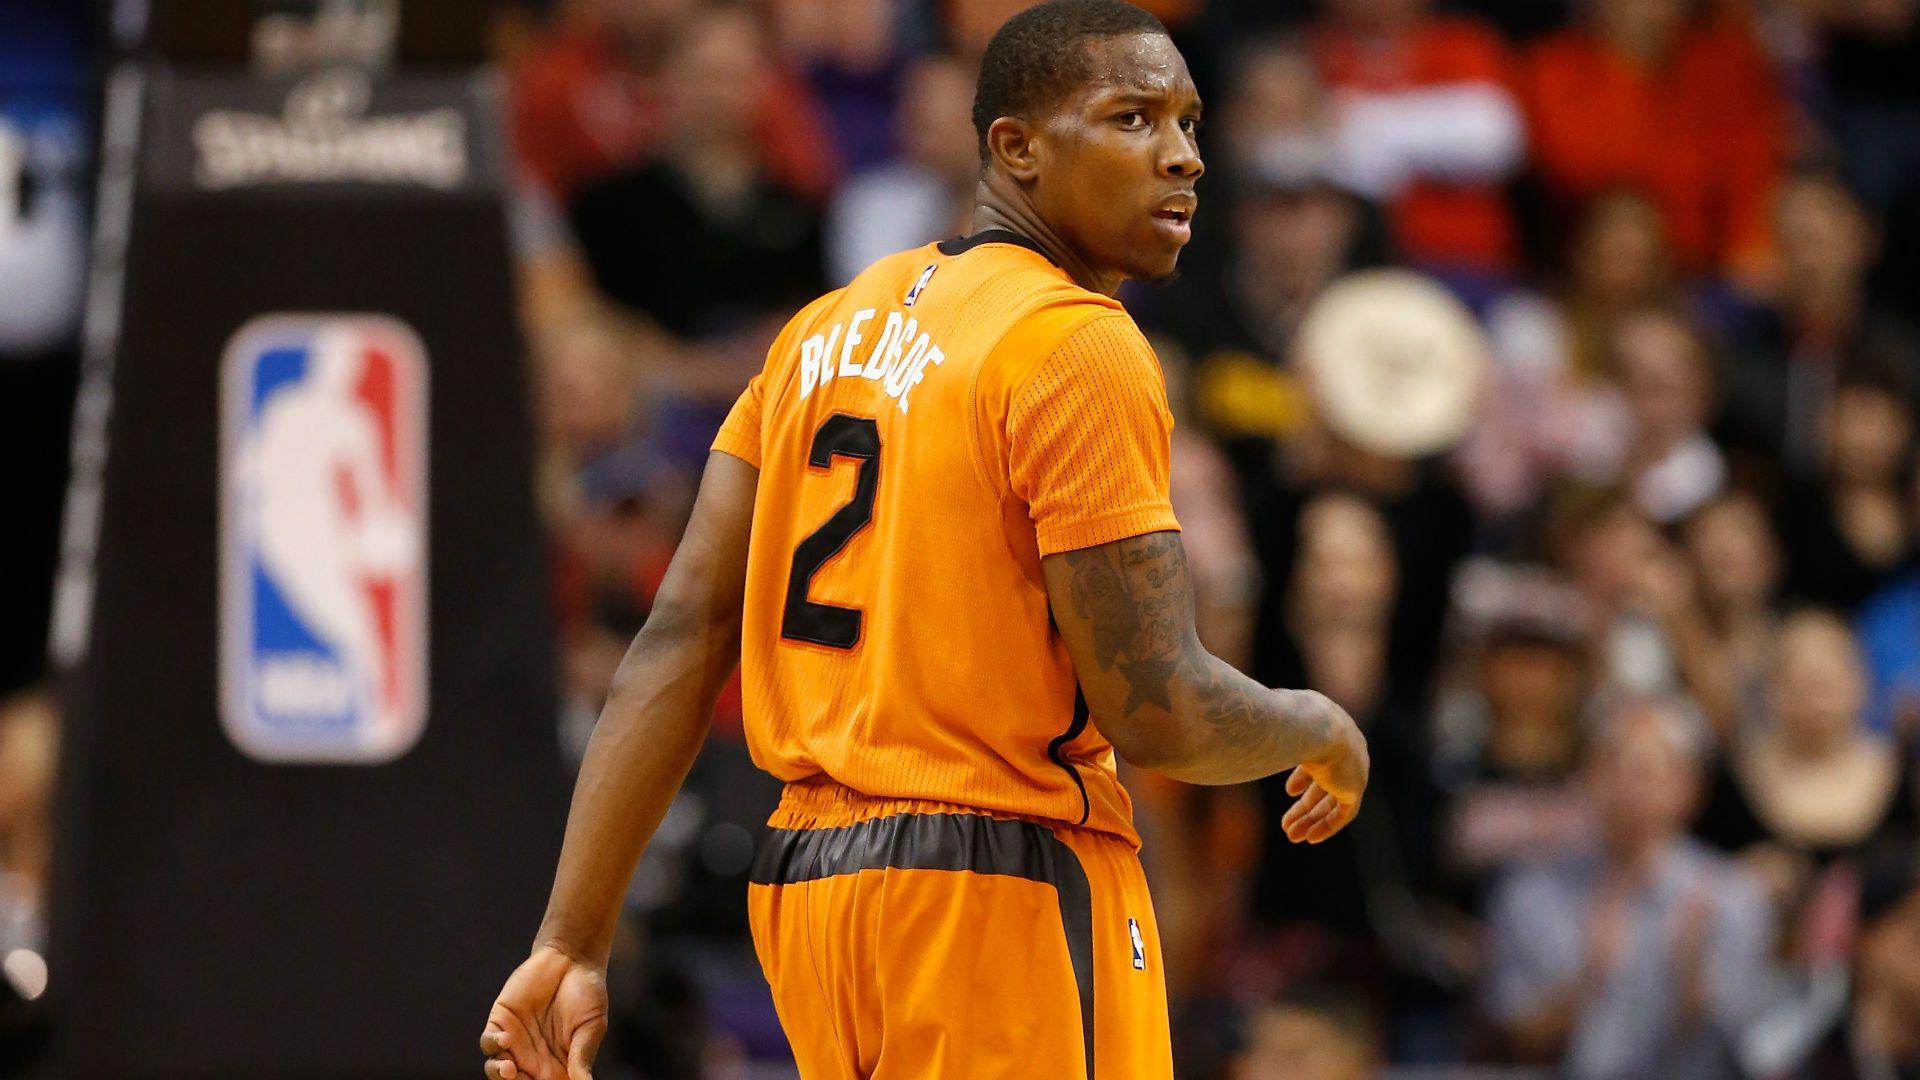 SN sources: Eric Bledsoe trade won't be easy for Suns, but Kings